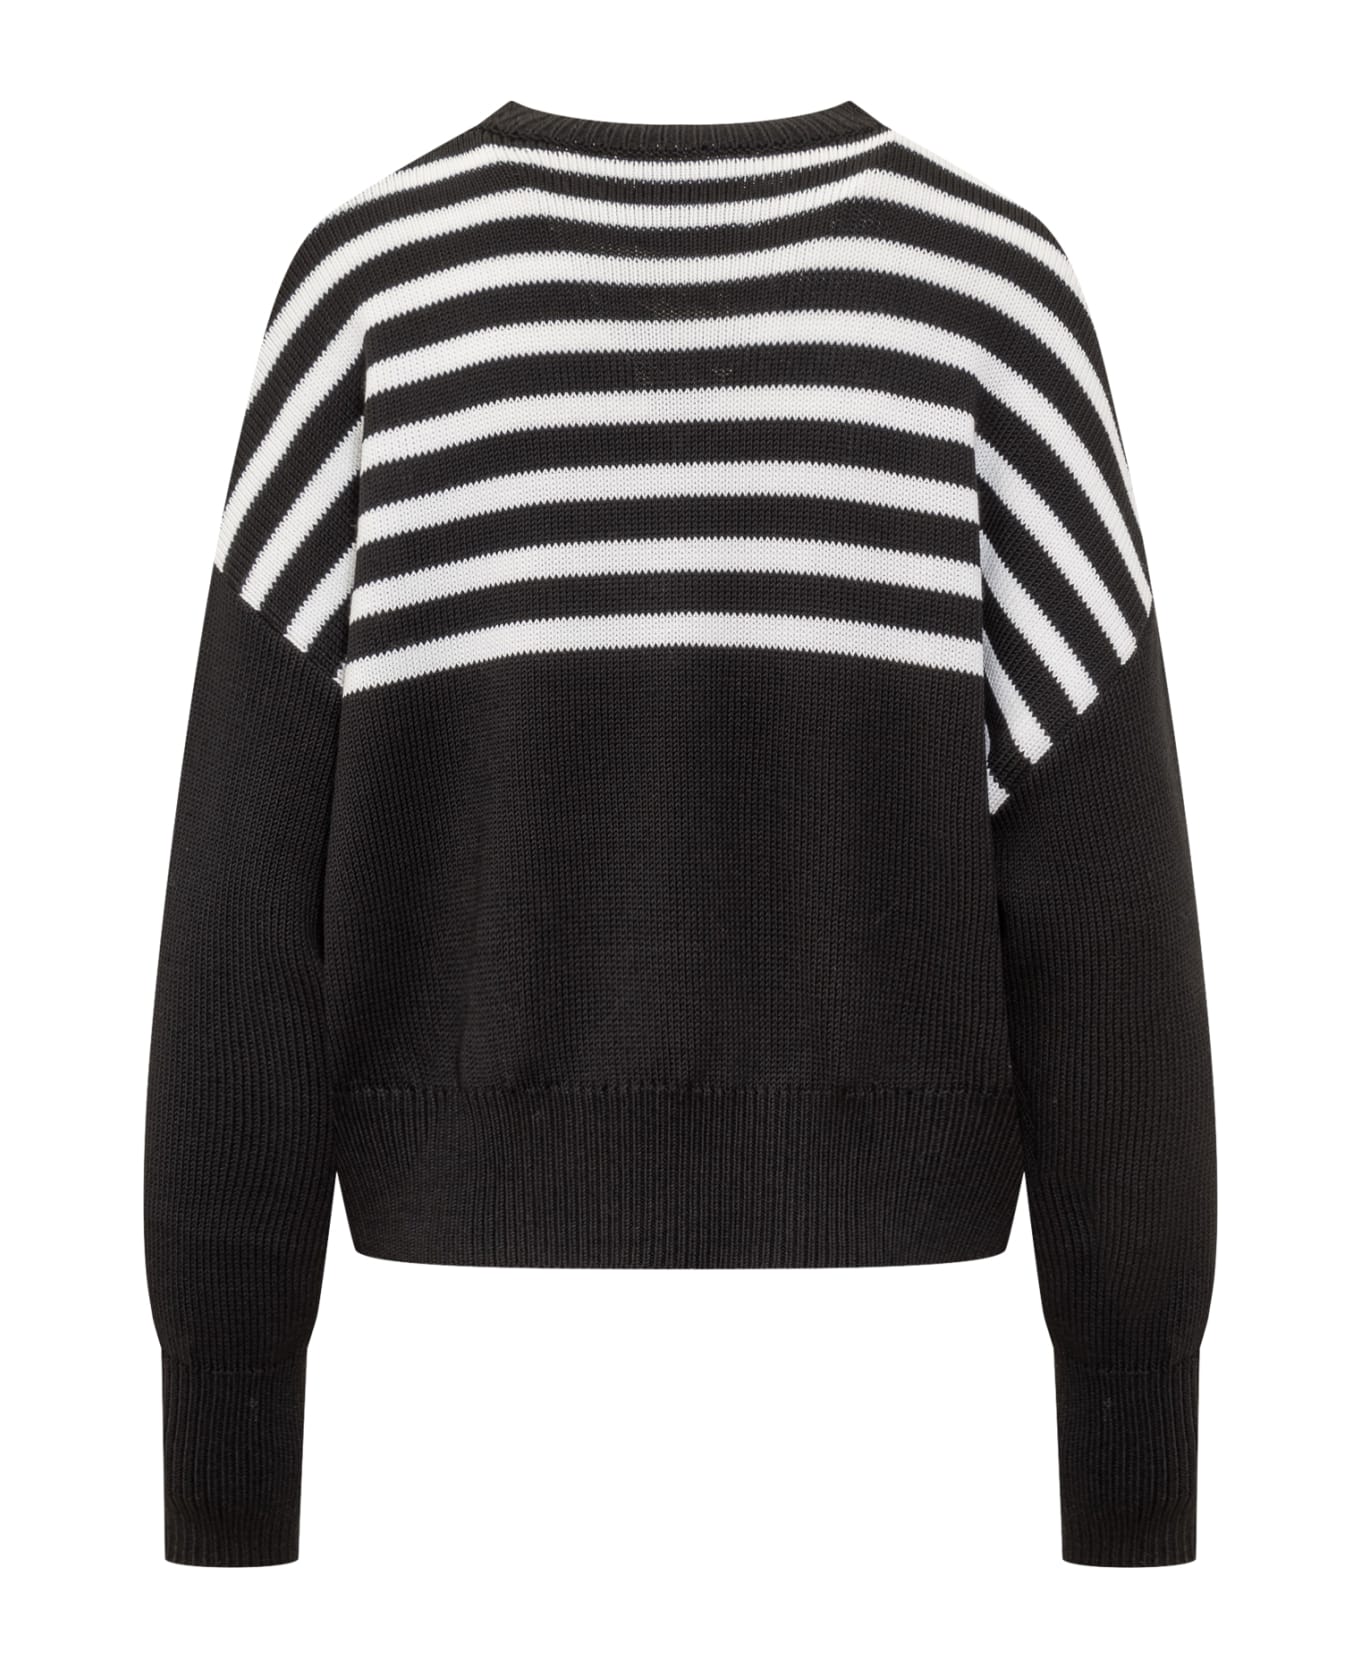 Givenchy Sweater - BLACK